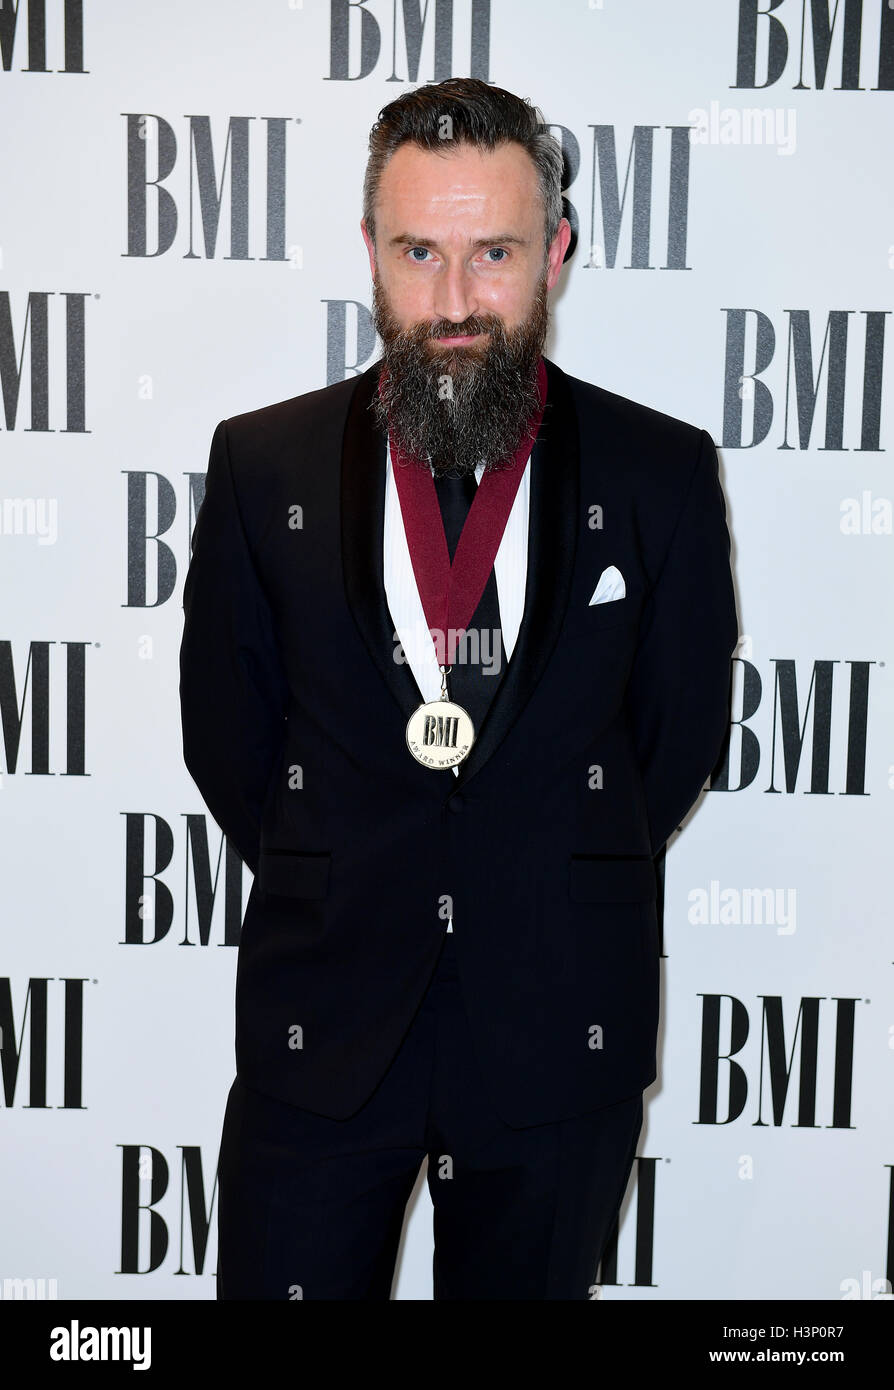 Noel Hogan attending the BMI London Awards at the Dorchester Hotel, London. PRESS ASSOCIATION Photo. Picture date: Monday 10th October, 2016. Photo credit should read: Ian West/PA Wire. Stock Photo